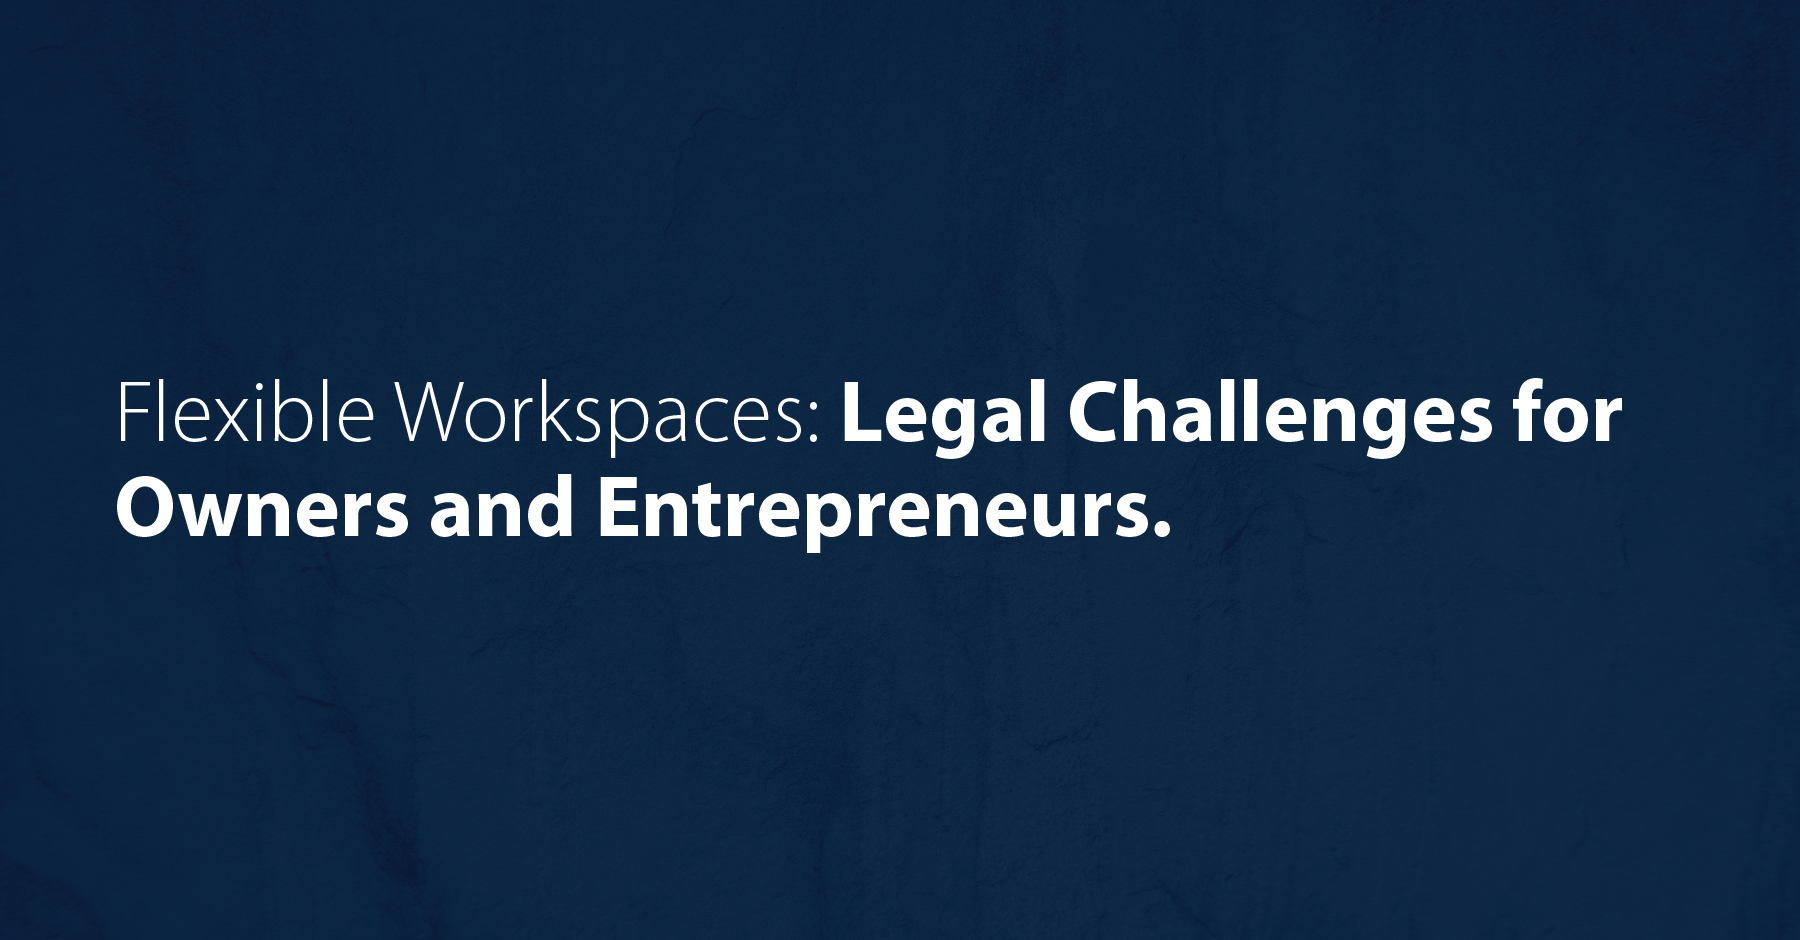 Flexible Workspaces: Legal Challenges for Owners and Entrepreneurs